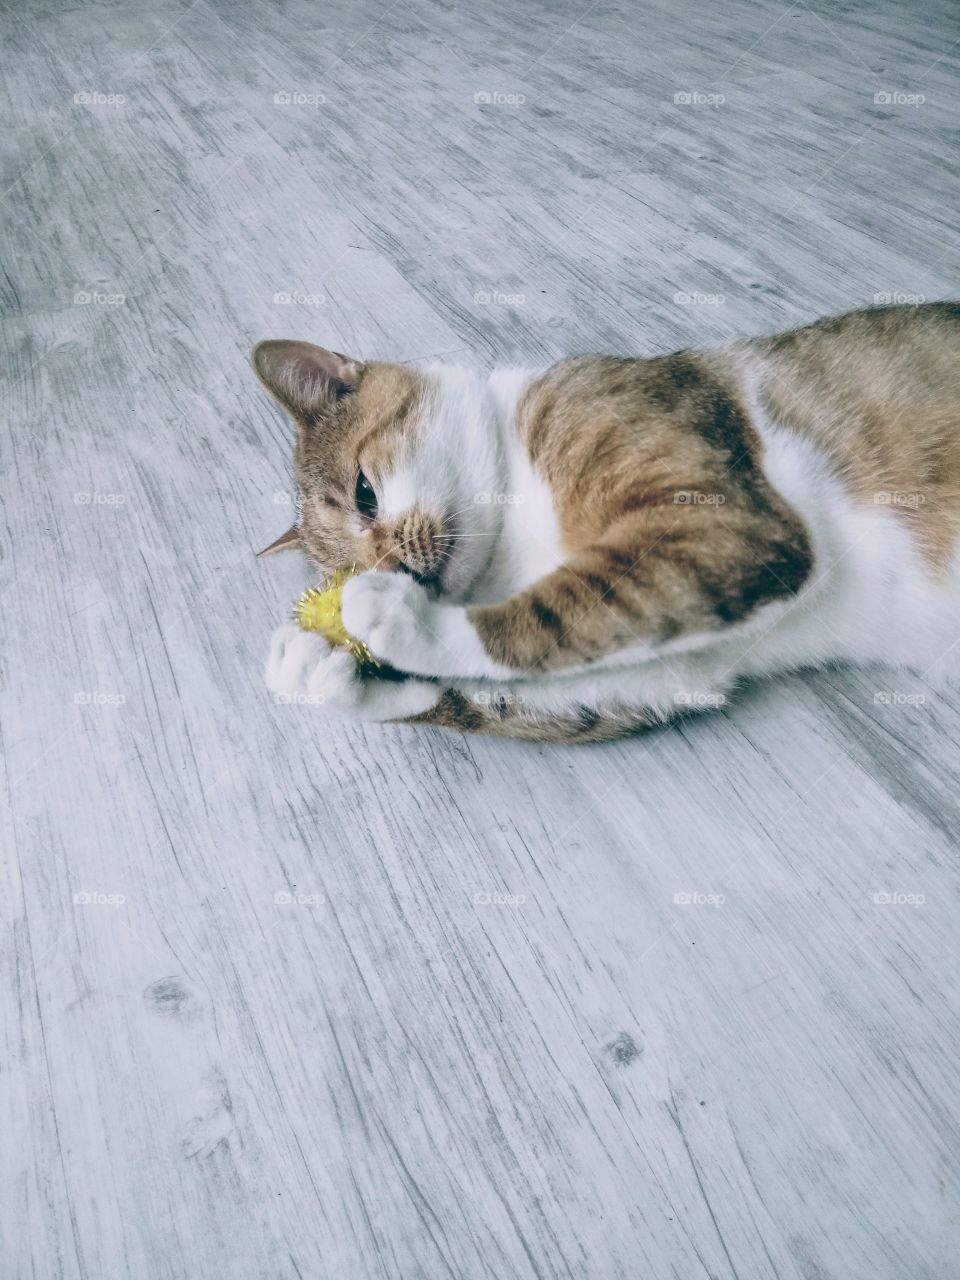 cat playing with a toy